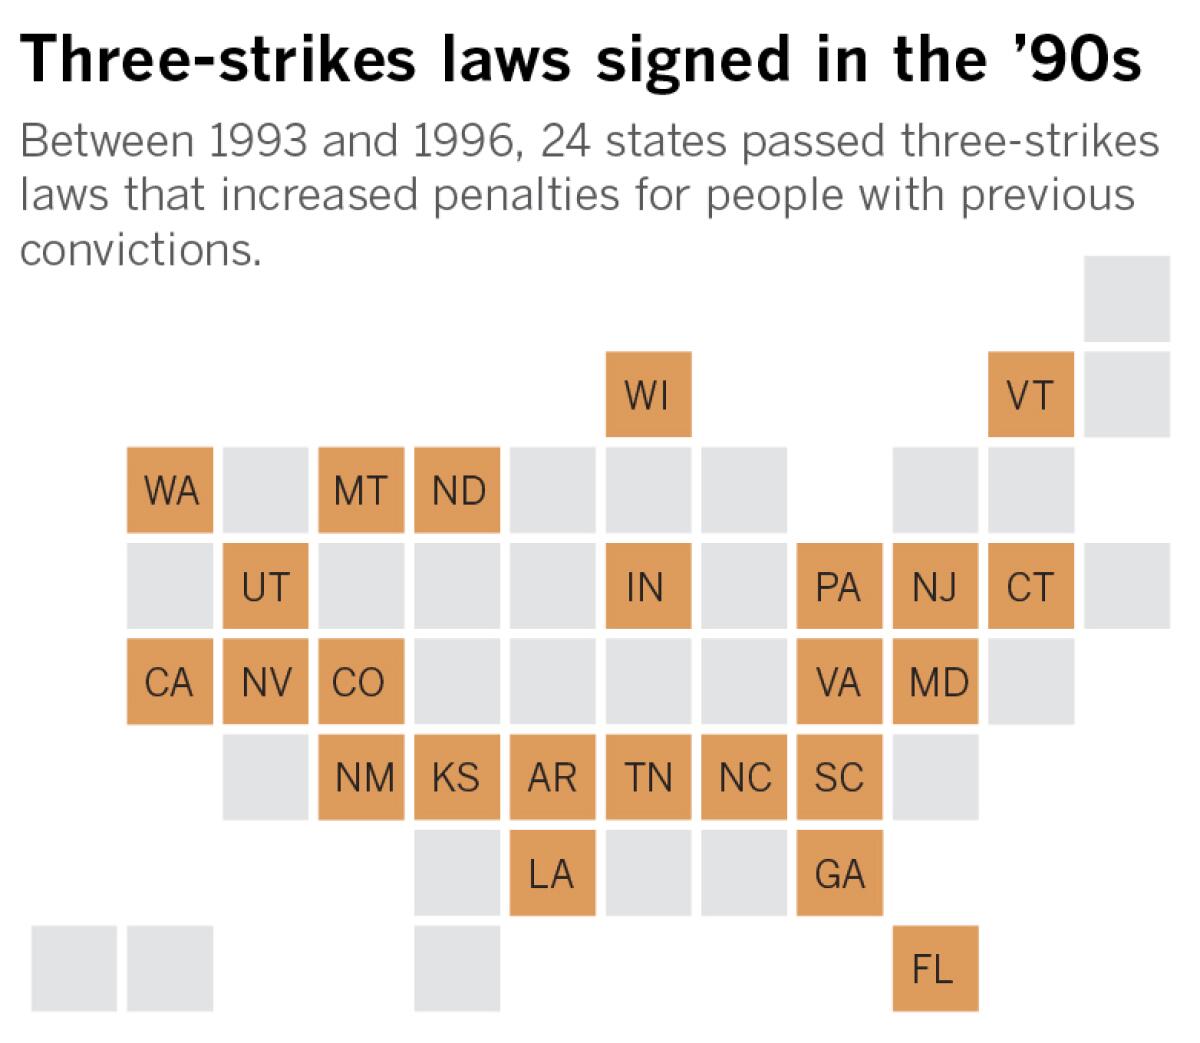 Between 1993 and 1996, 24 states passed three-strikes laws which increased penalties for repeat criminals.